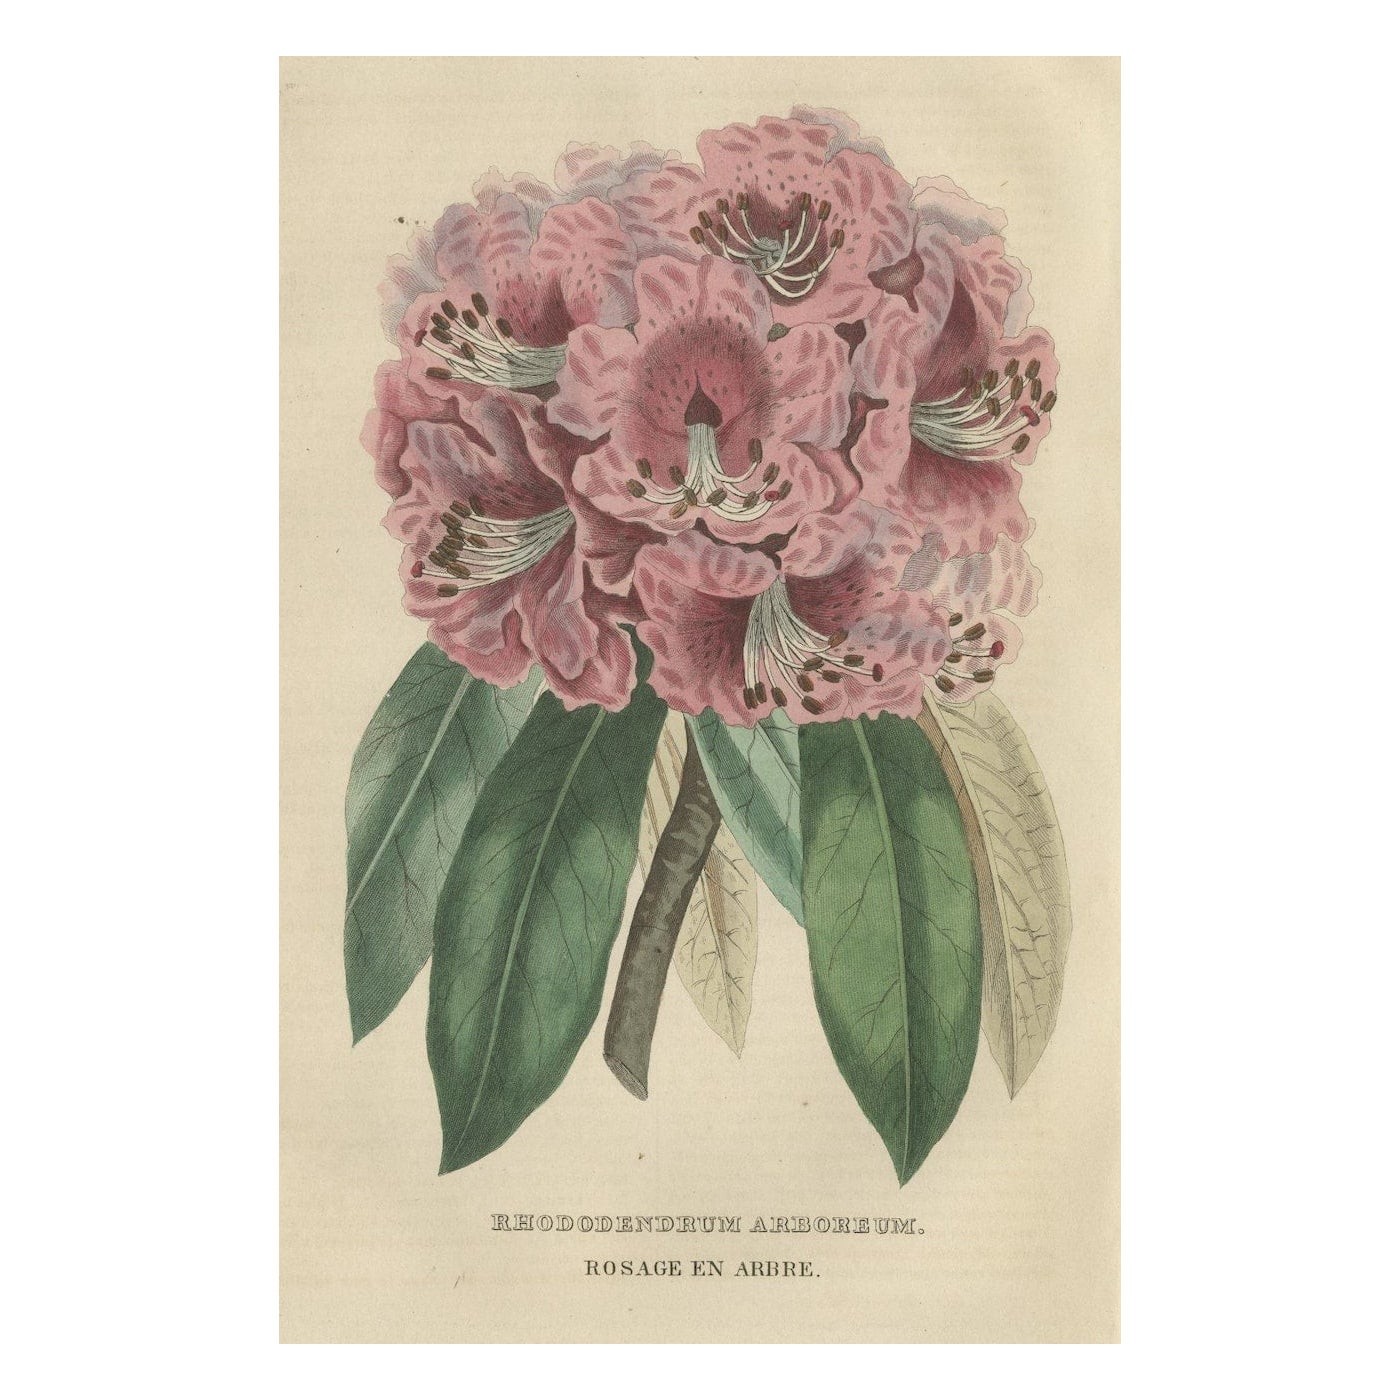 Tree Rhododendron: An Original Hand-Colored Engraving from 1845 For Sale